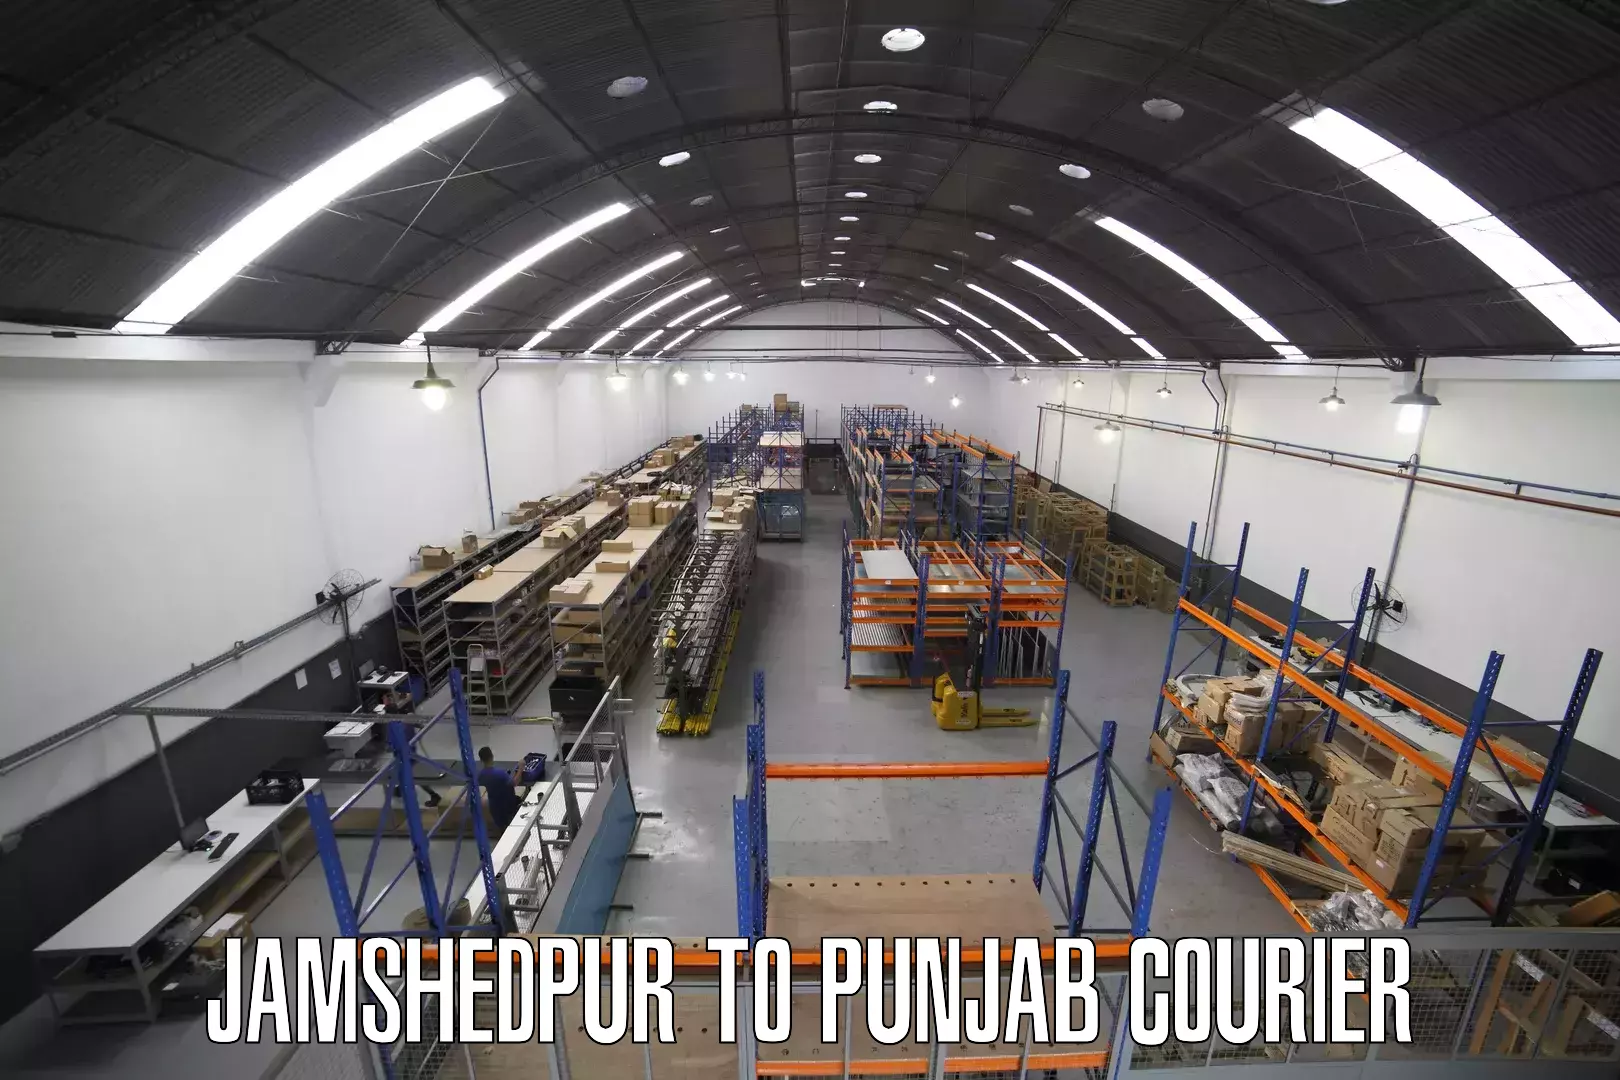 Express courier capabilities Jamshedpur to Amritsar